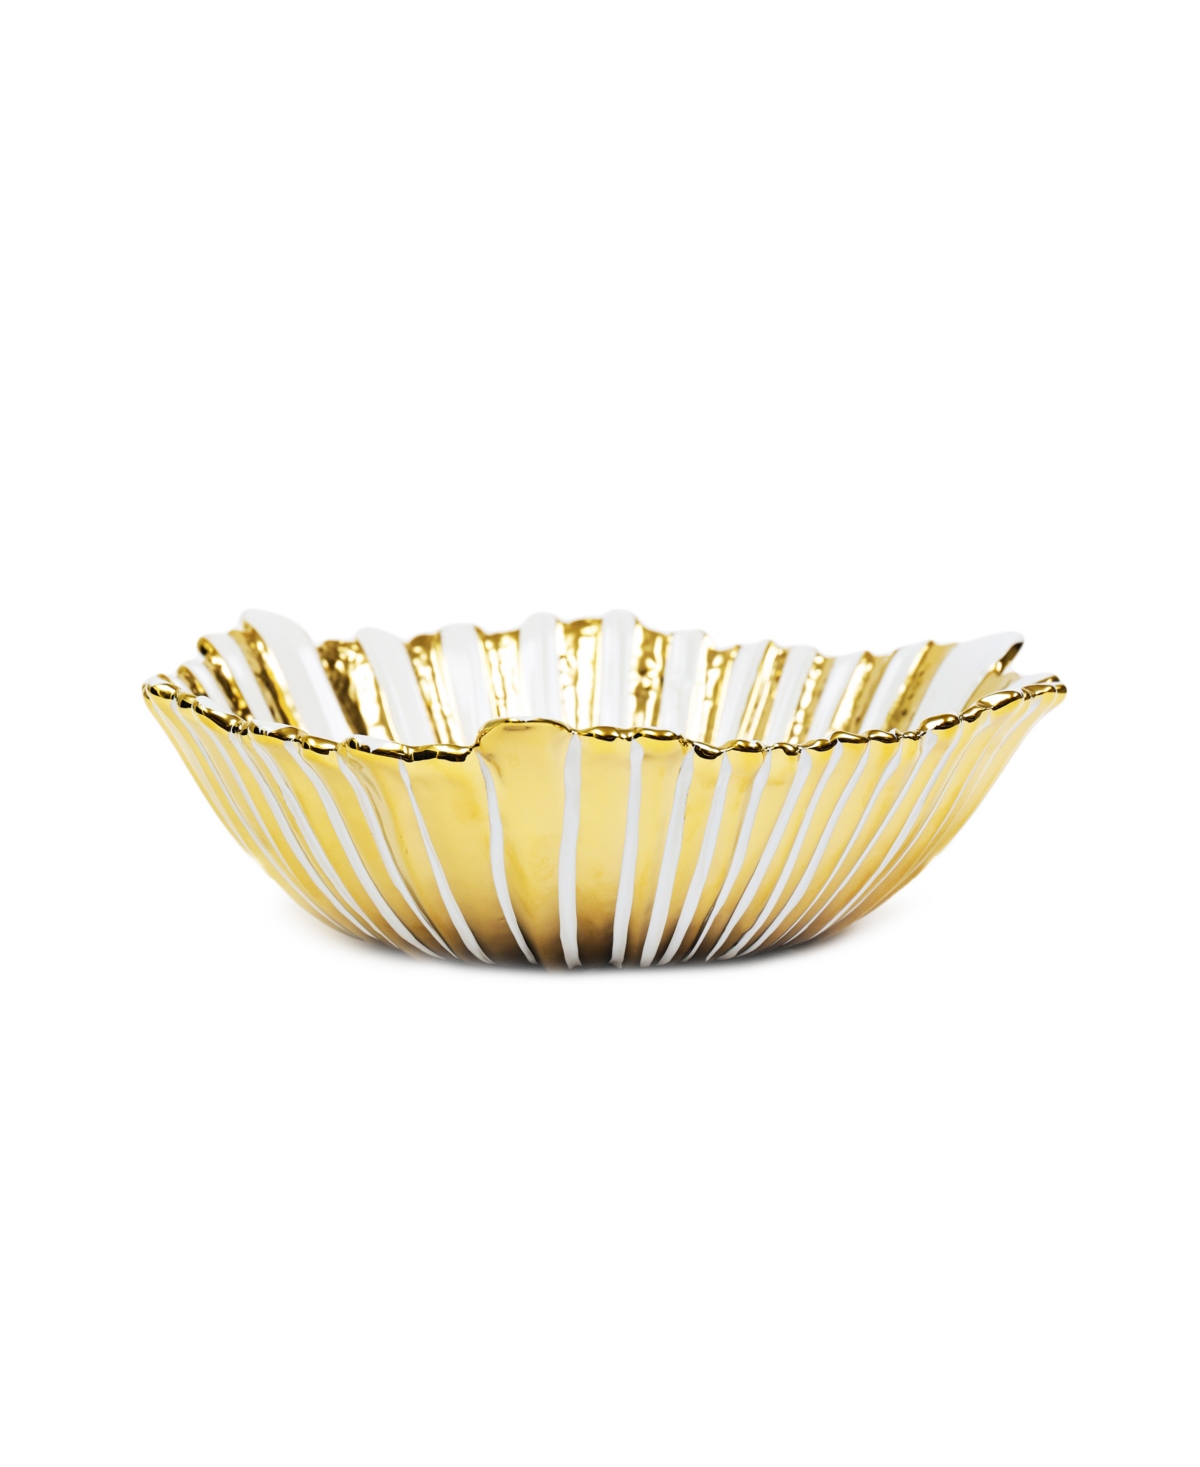 White and Gold-Tone Striped Flower Shaped Bowl - White, Gold